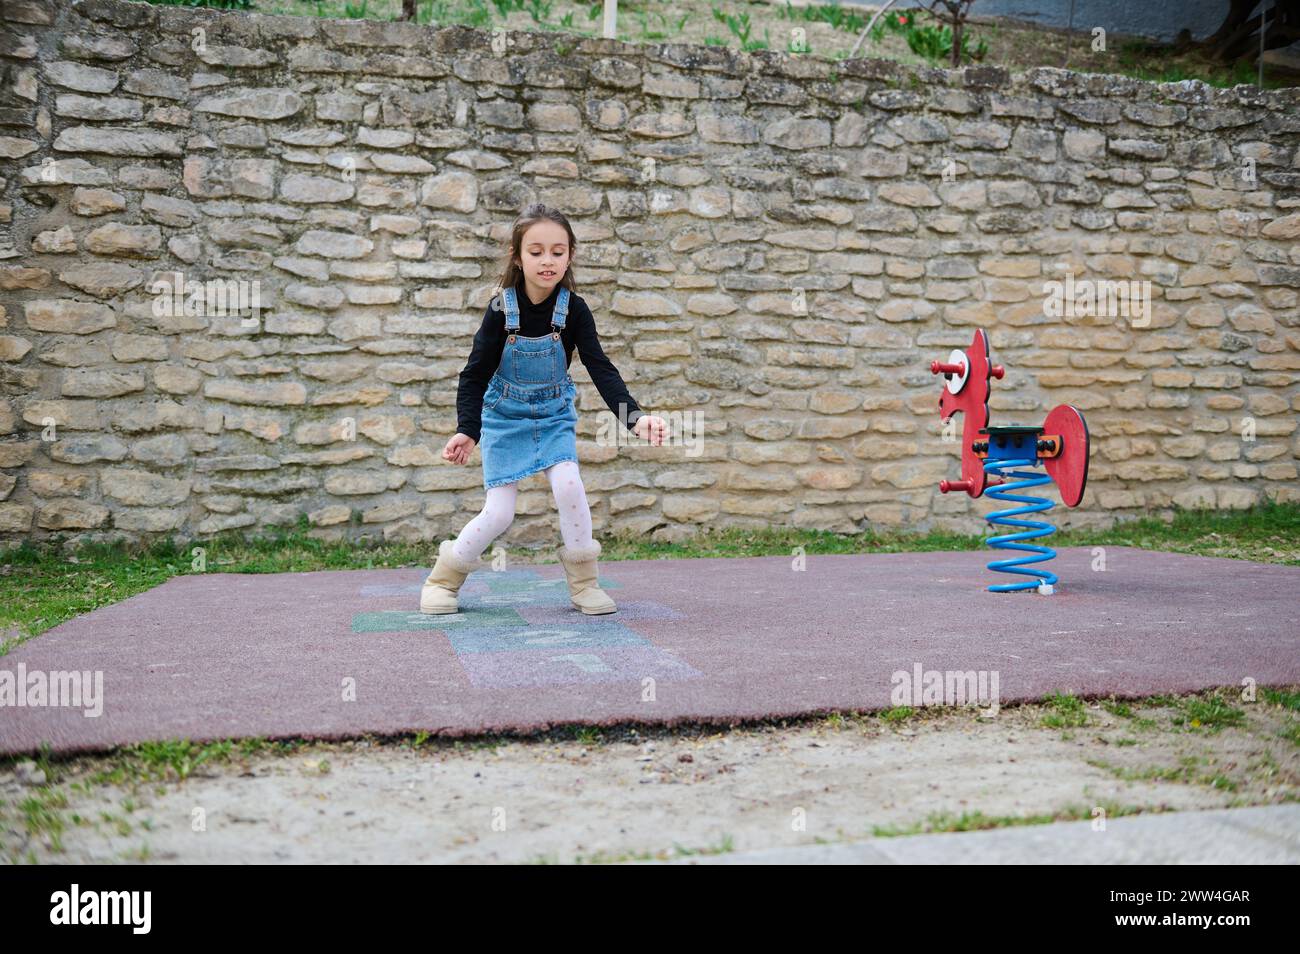 Active little child girl, elementary age schoolgirl plays hopscotch, takes turns jumping over squares marked on the ground. Street children's games in Stock Photo